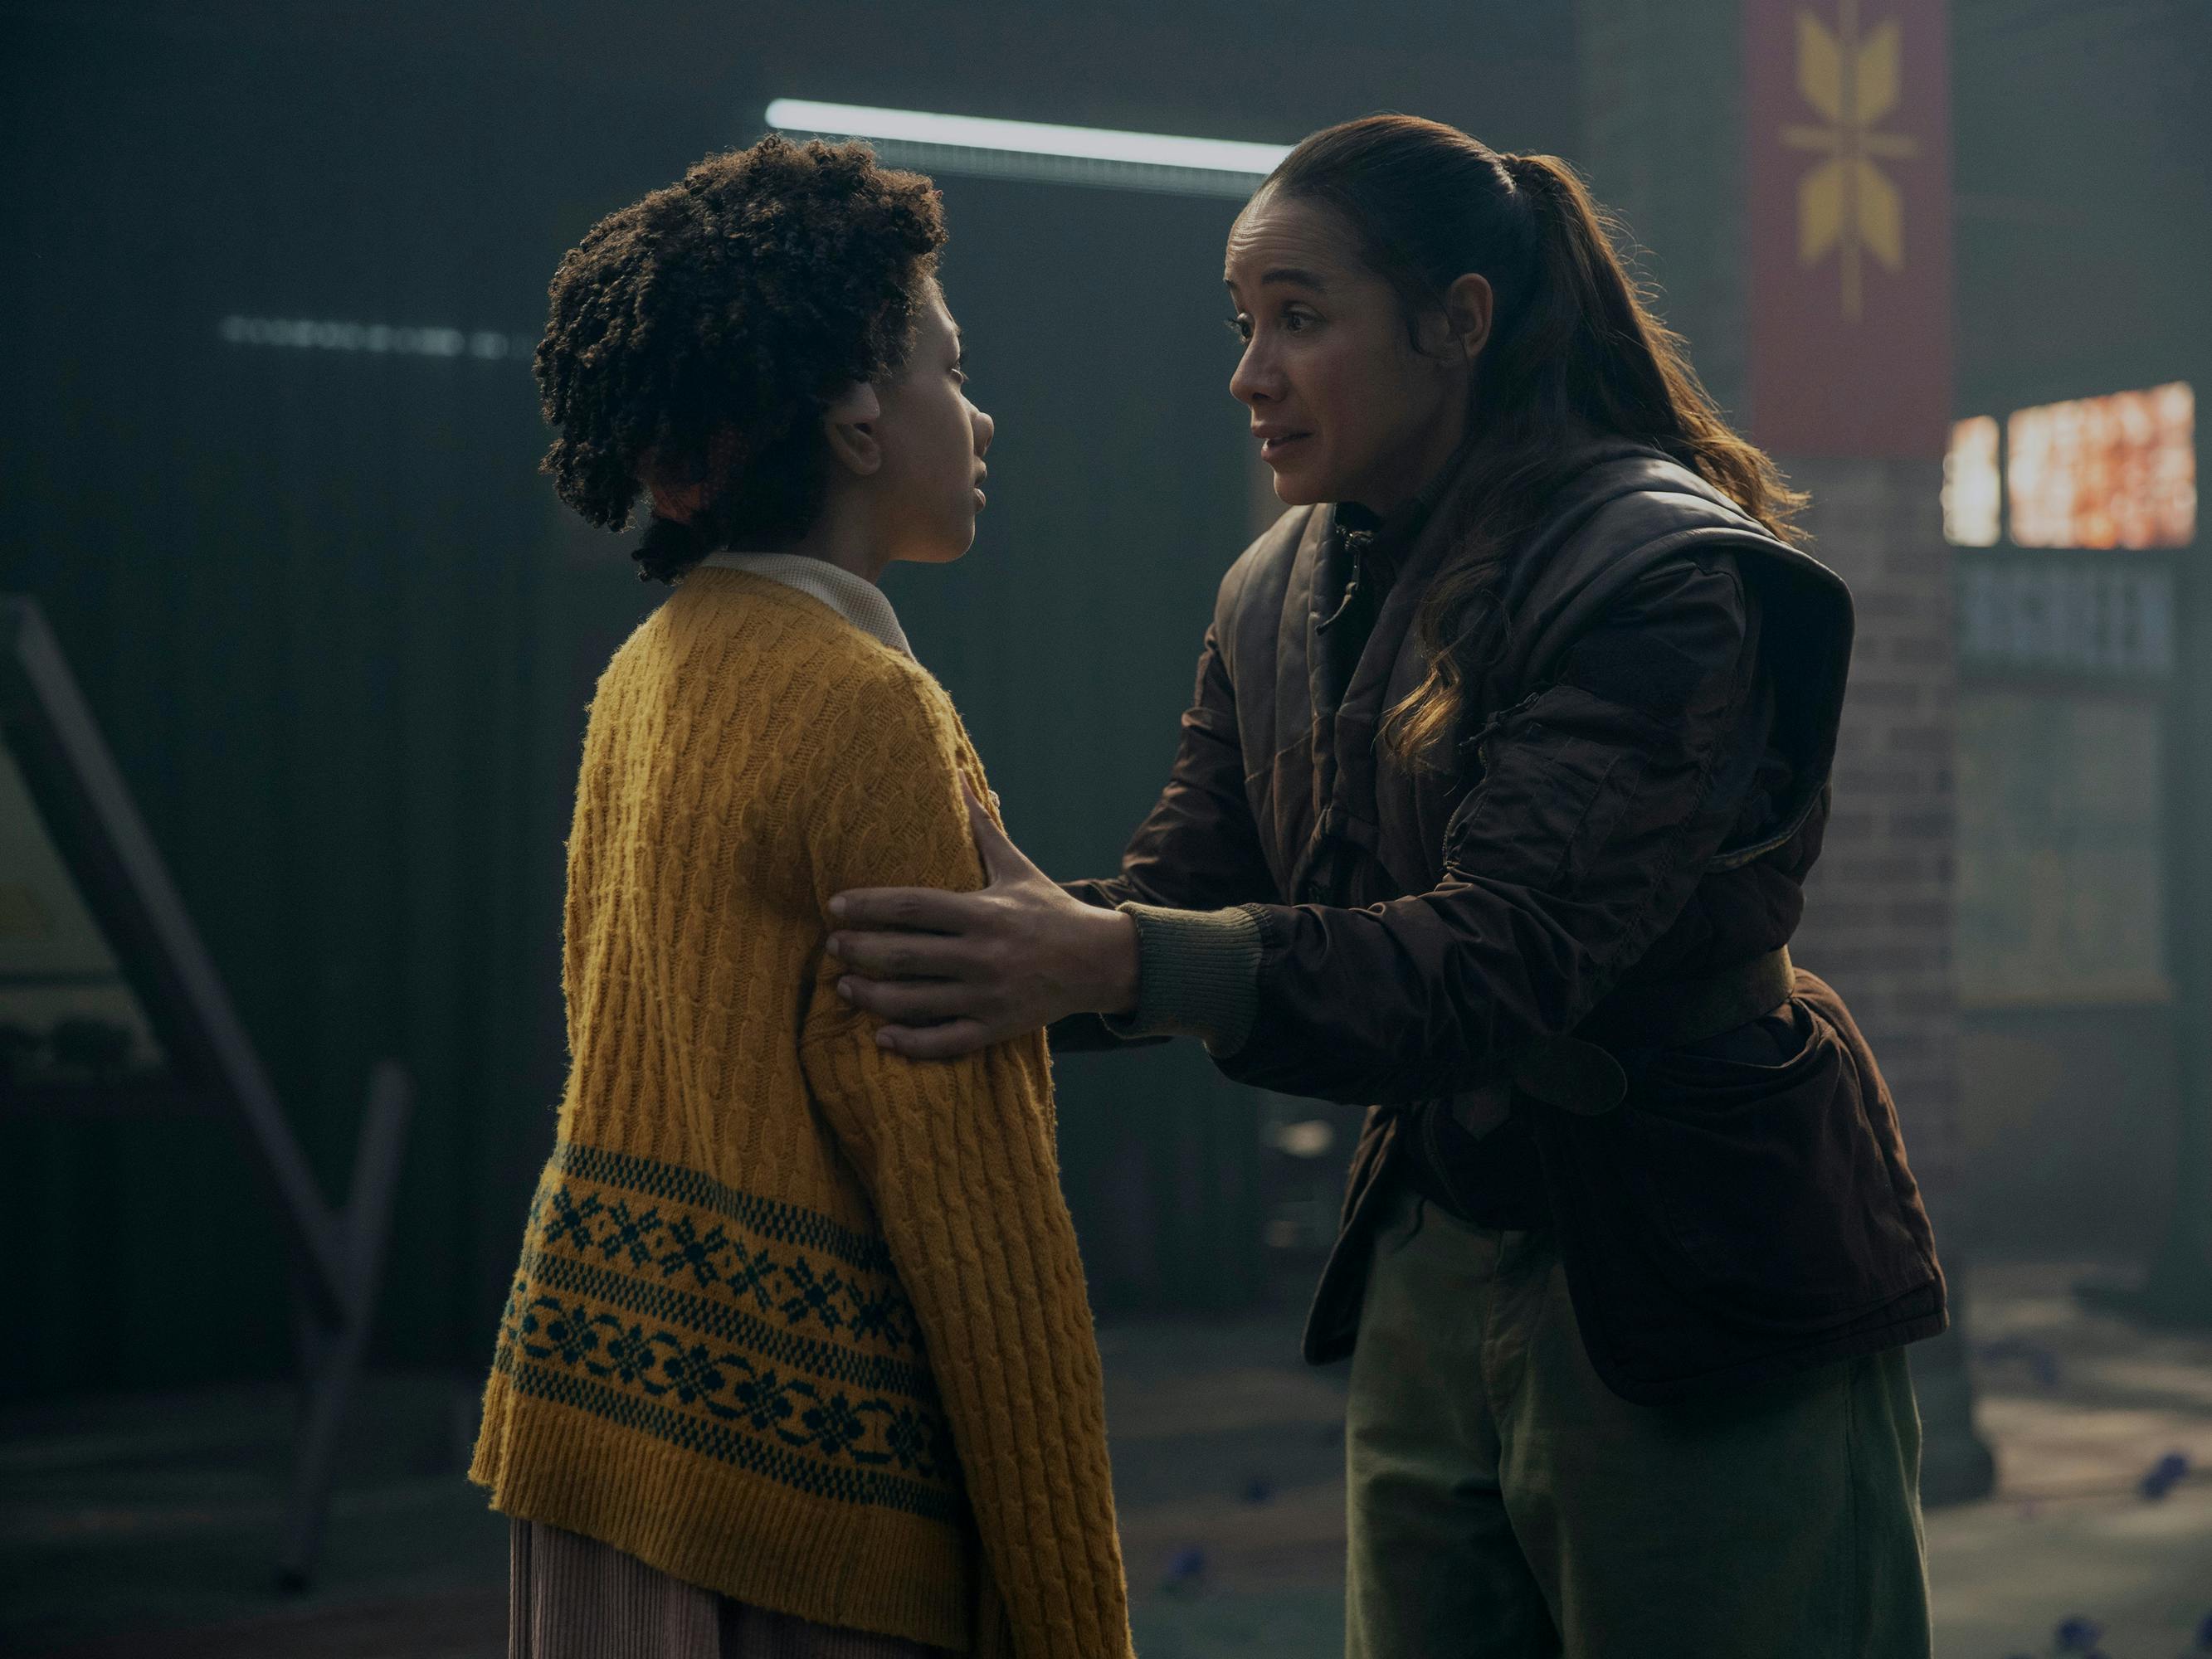 Wendy (Naledi Murray) wears a yellow sweater with her back to the camera. Aimee (Dania Ramirez) holds her by the arms with an insistent expression.